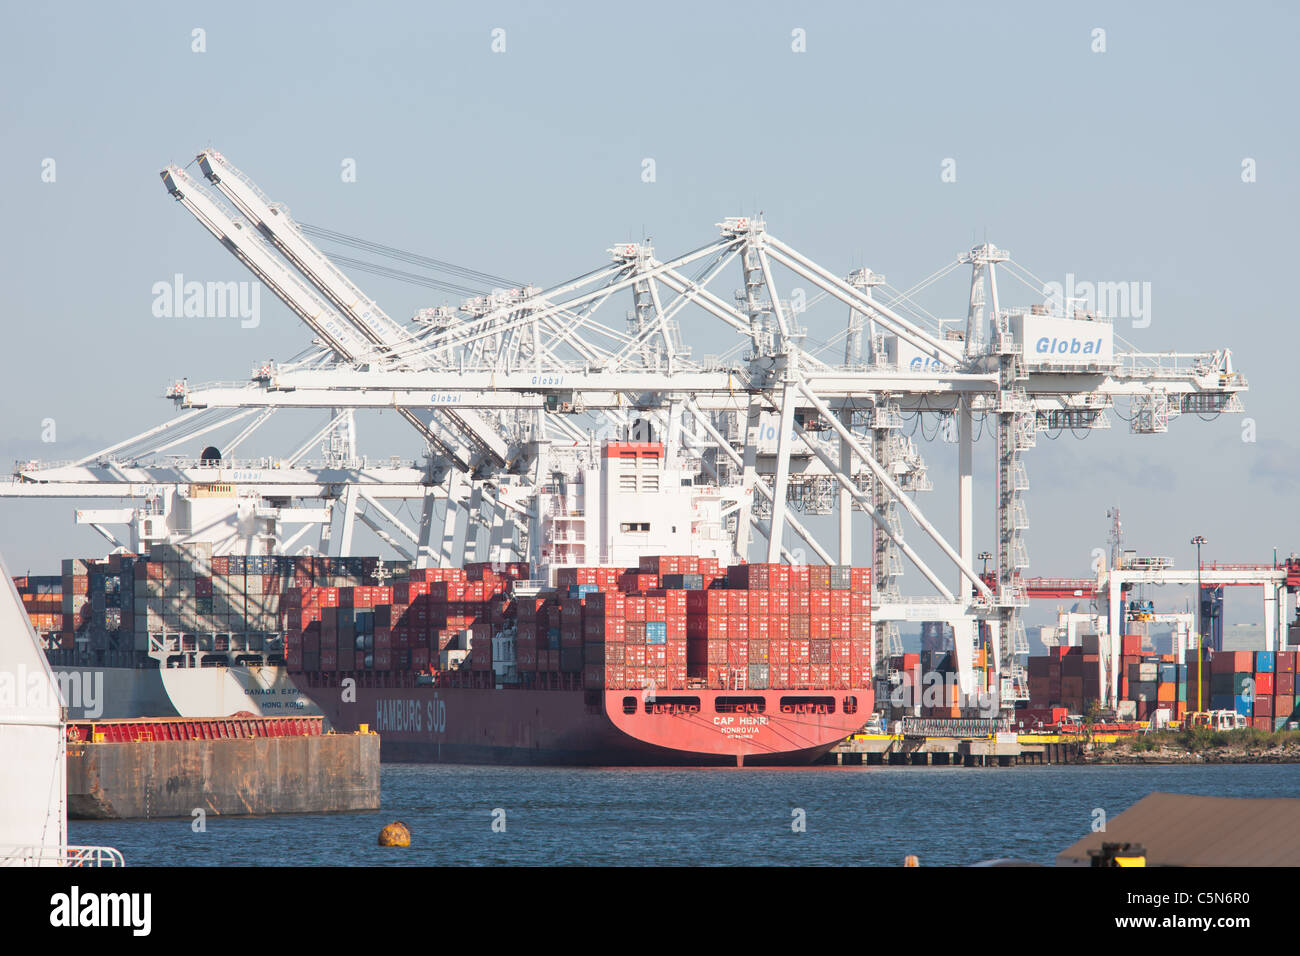 Cranes load Hamburg Sud container ship Cap Henri at the Global Container Terminals facility in Jersey City, New Jersey. Stock Photo